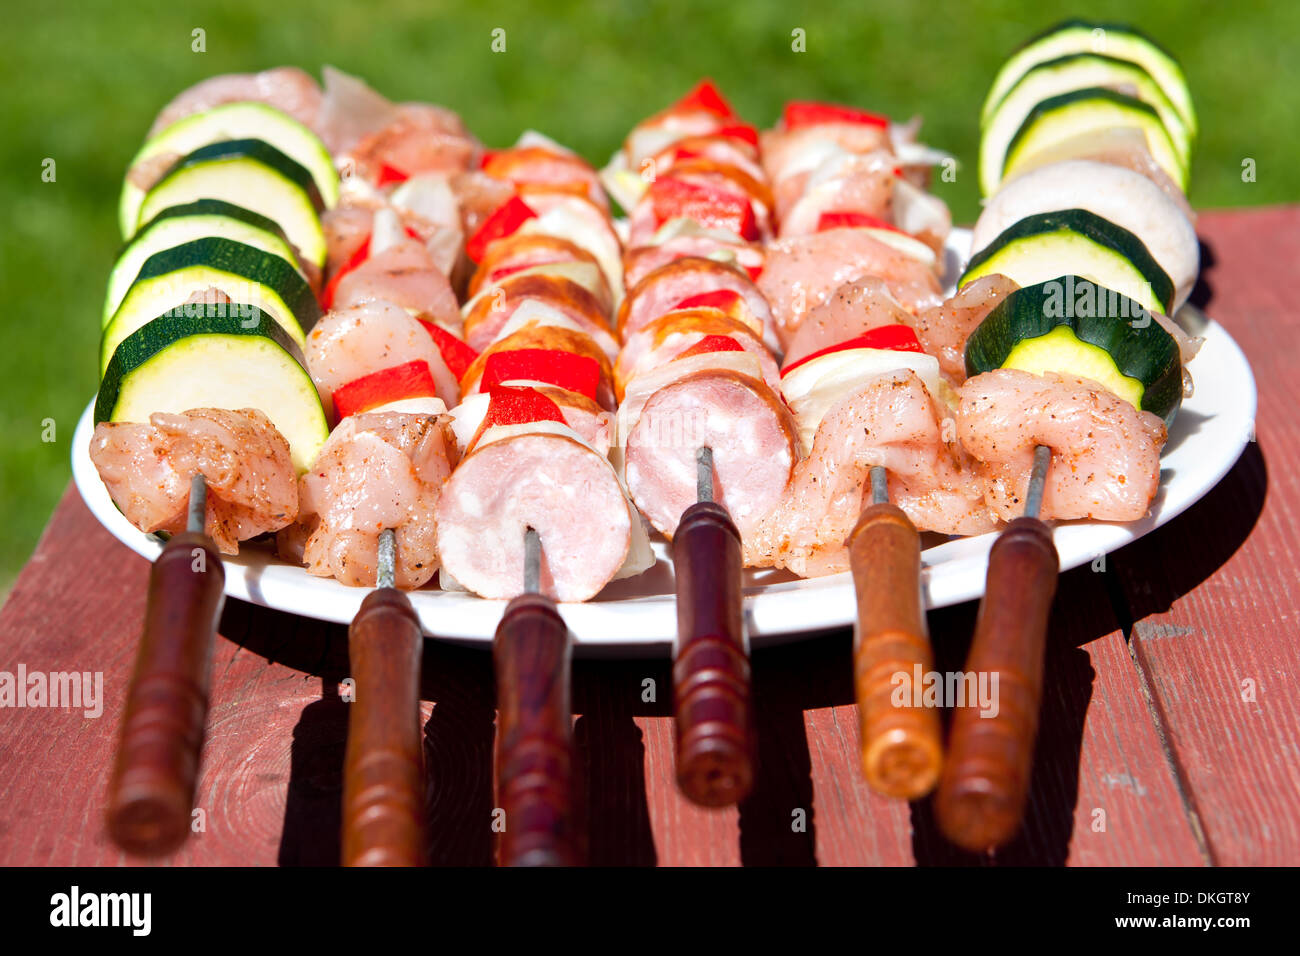 few raw shashliks on a plate, ready t be grilled Stock Photo